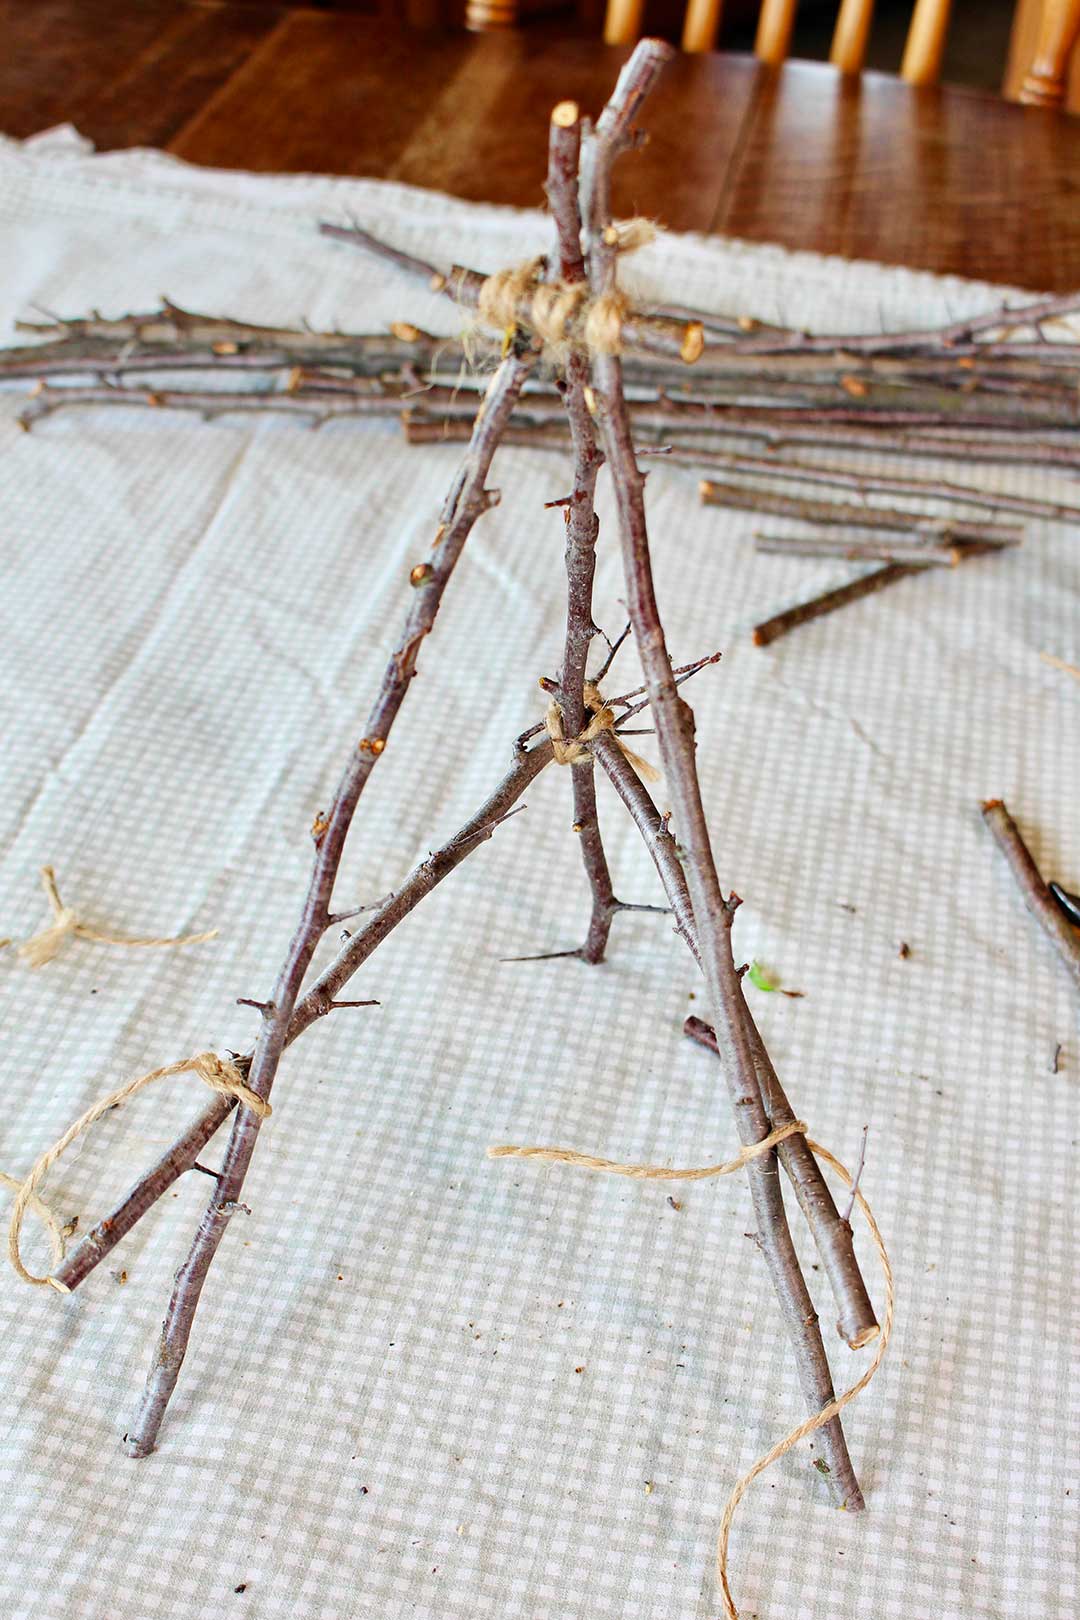 Semi completed easel made from twigs with a pile of twigs behind it on the kitchen table.